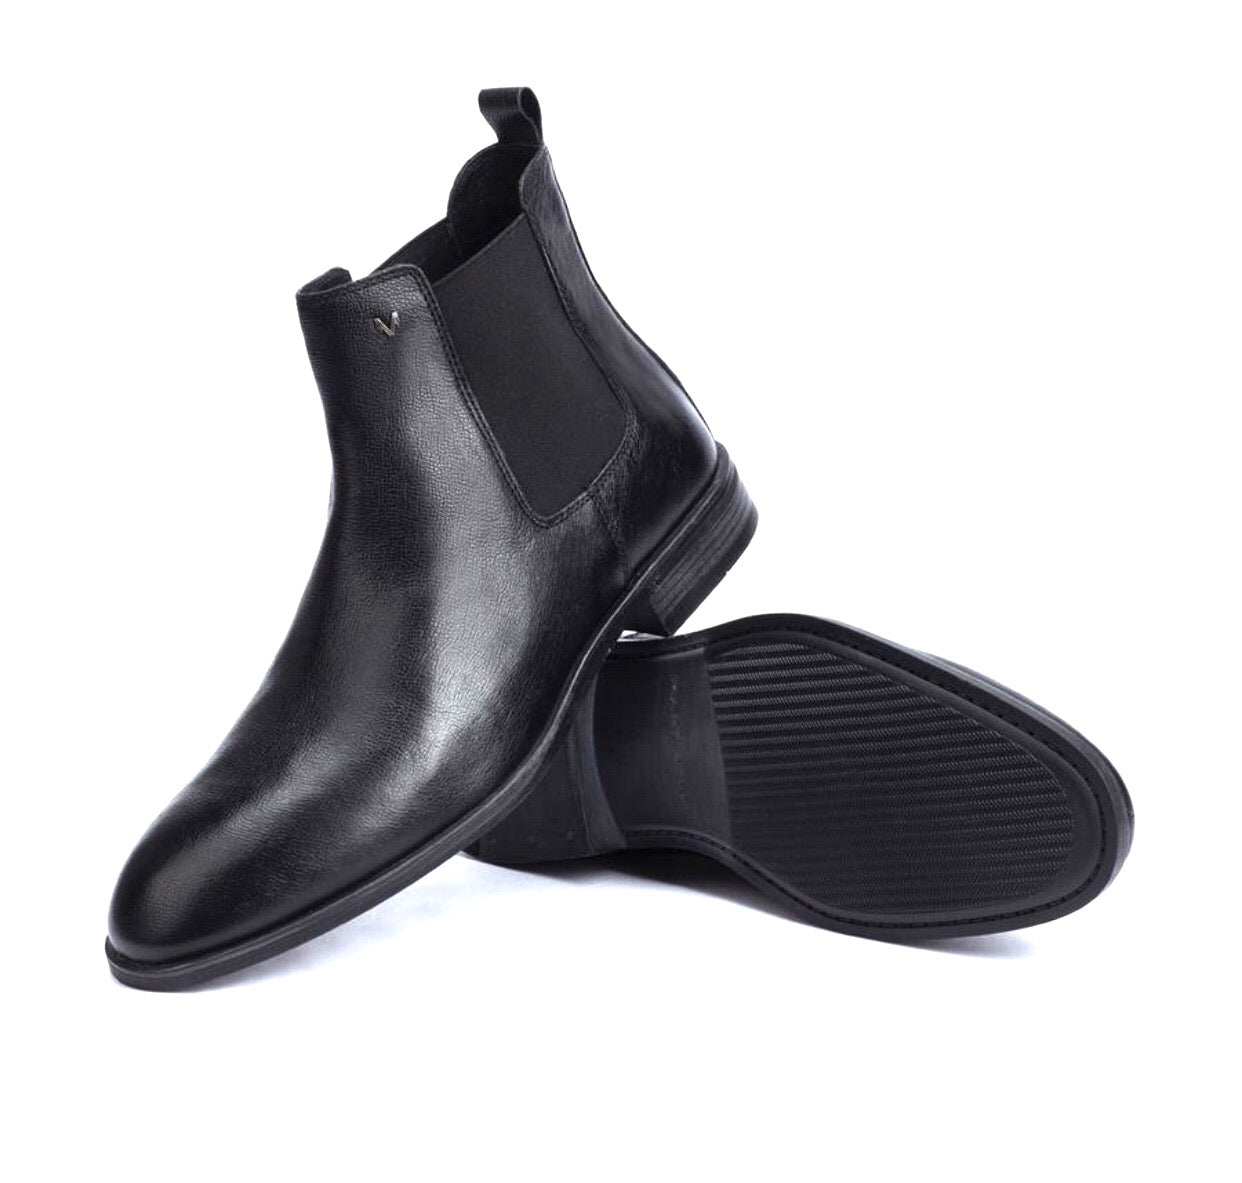 Martinelli 1456-2540R Warren Black Leather Chelsea Boot Made In Spain